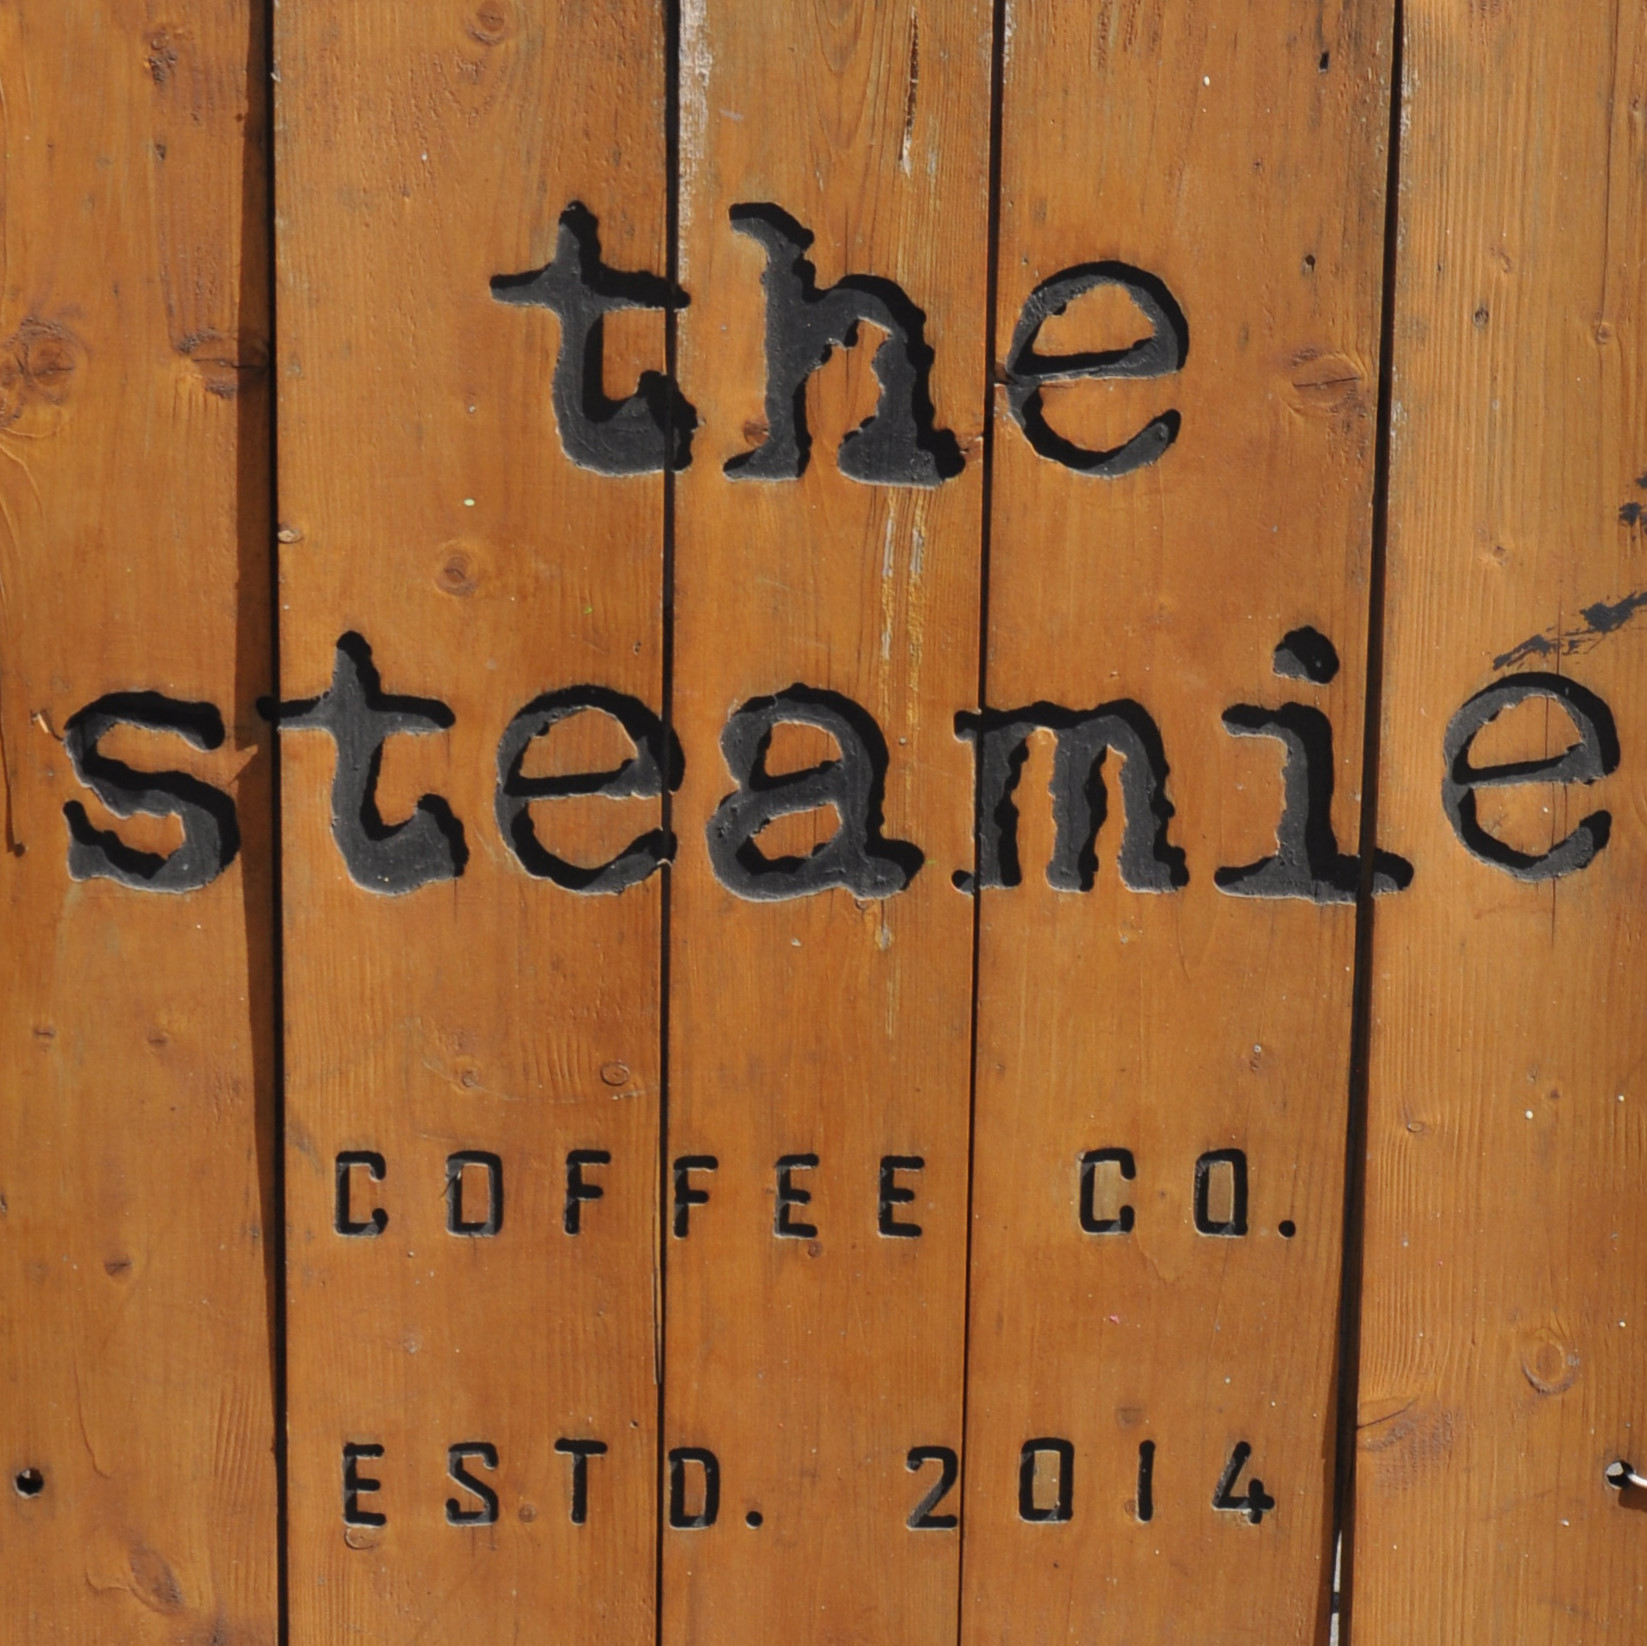 Detail from the A-board outside The Steamie on Glasgow's Argyle Street on a sunny day in May. Reads: "The Steamie Coffee Co. Estd. 2014"